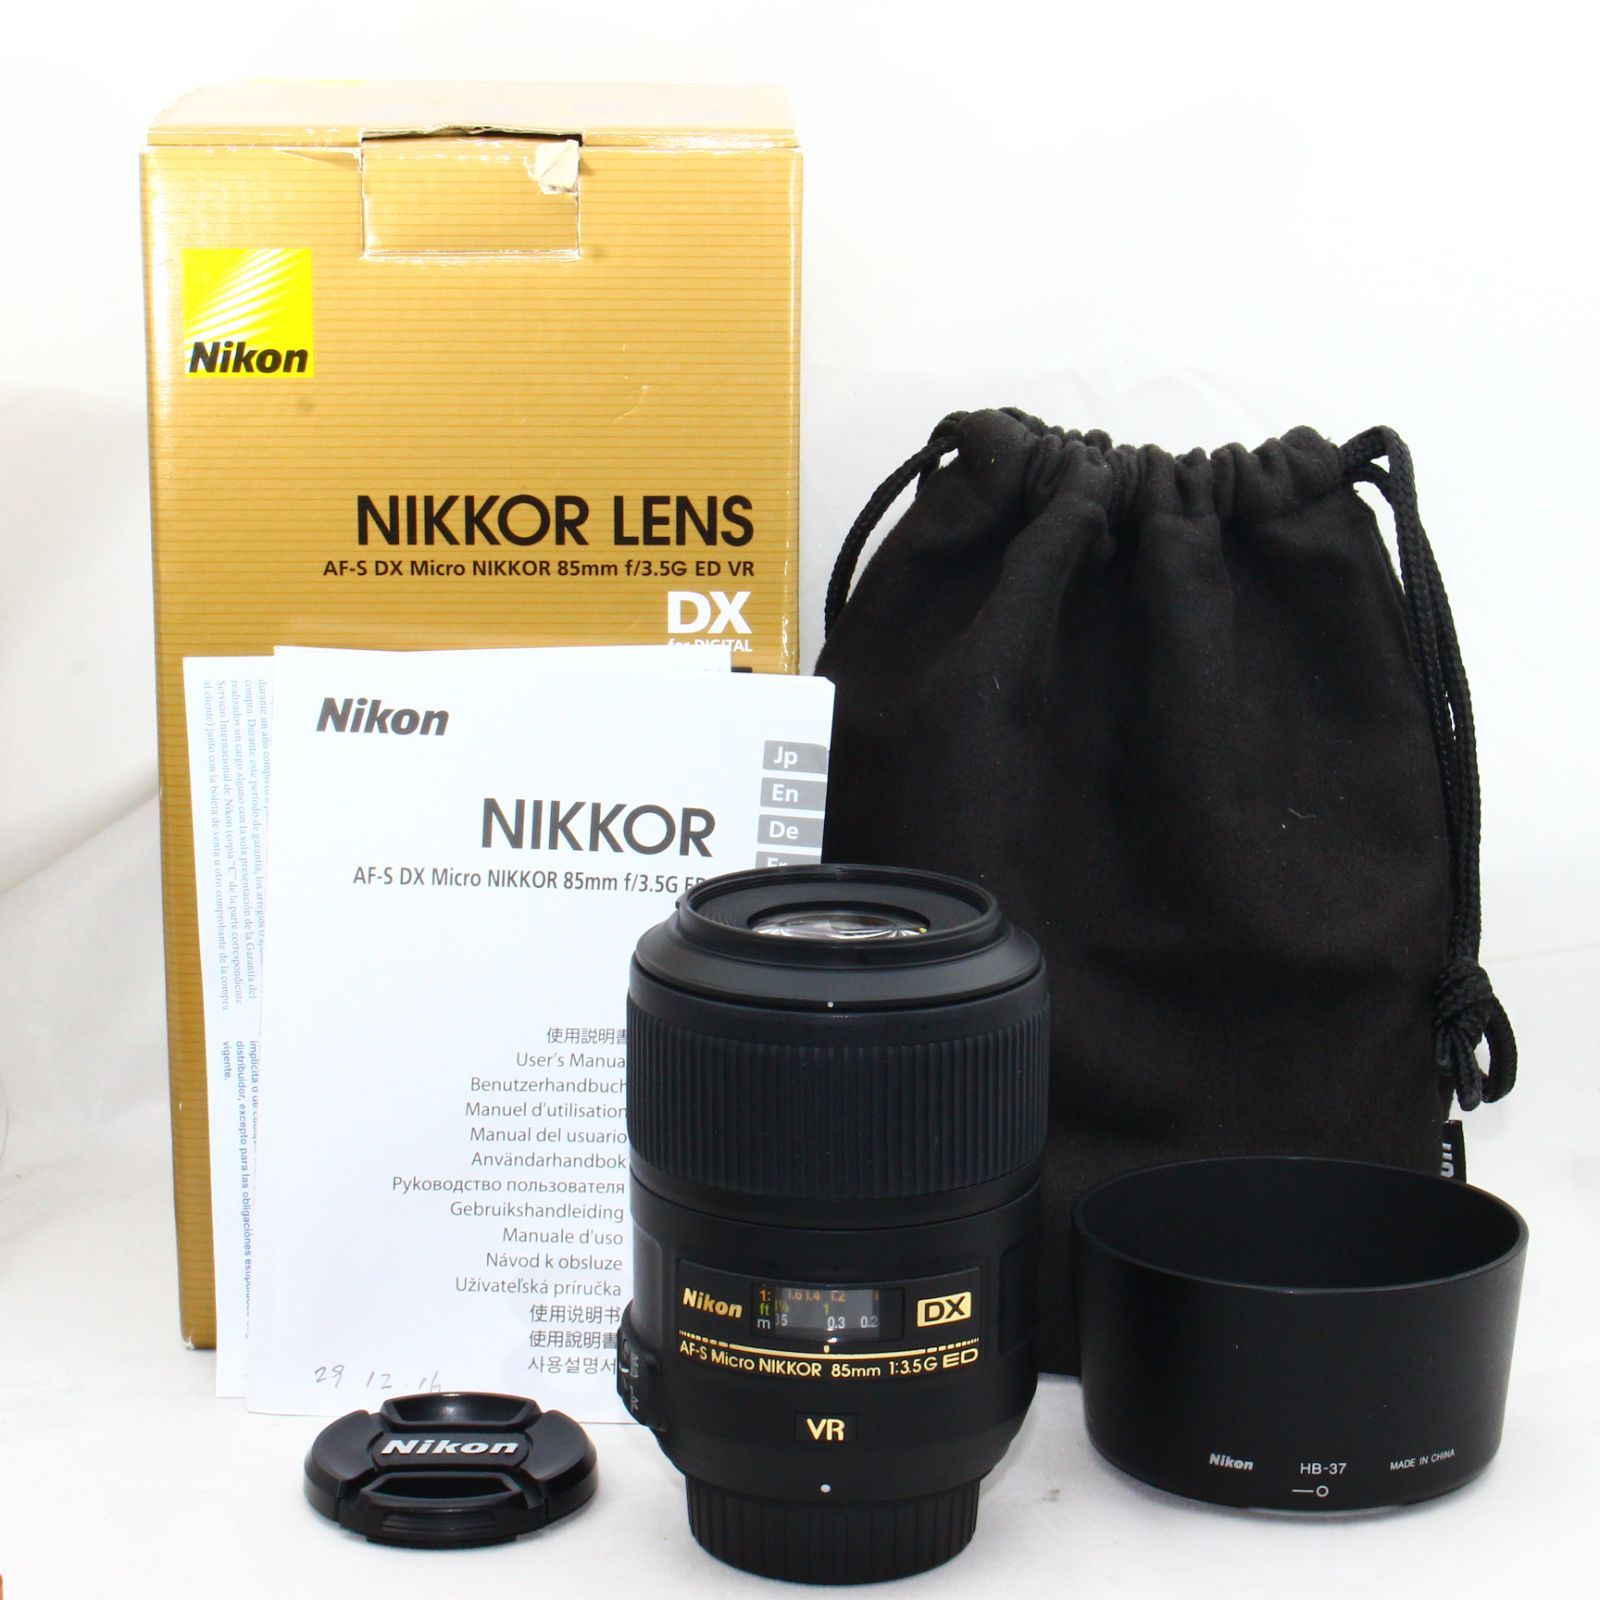 Nikon 単焦点マイクロレンズ AF-S DX Micro NIKKOR 40mm f/2.8G ニコン